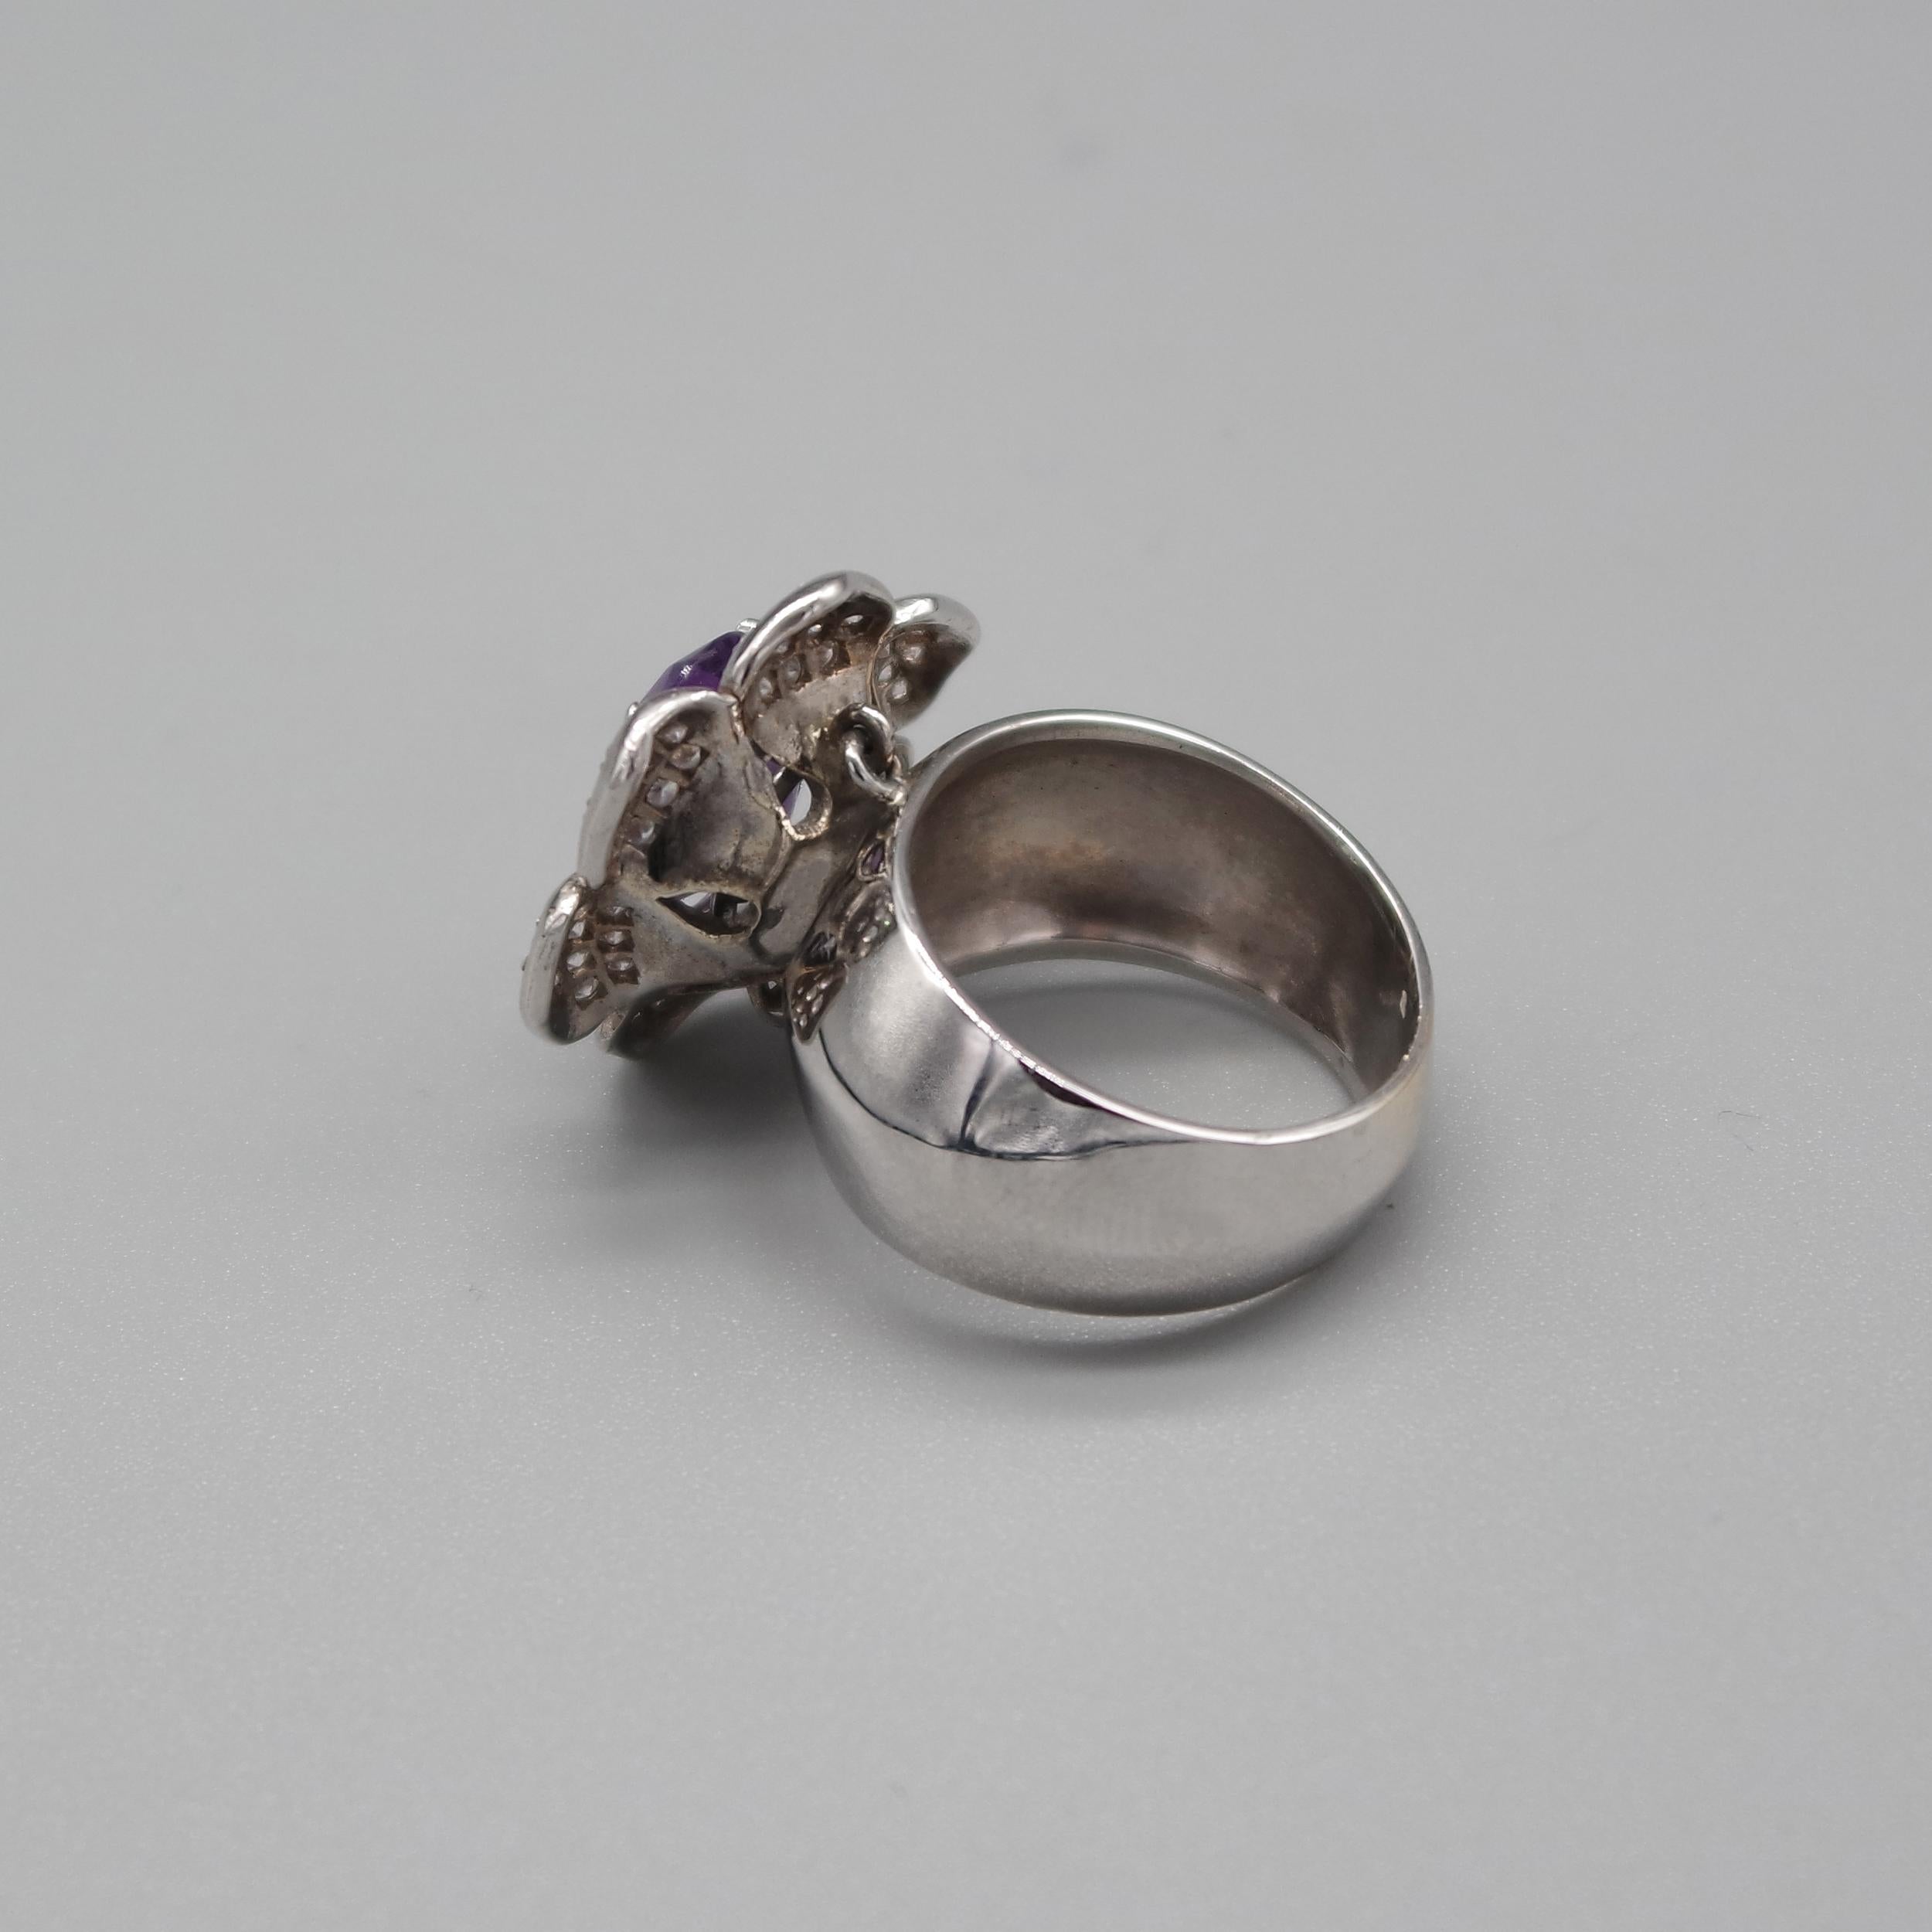 Artist 4.35 Carats Amethyst and Diamonds on an 18 Karat White Gold Cocktail Ring